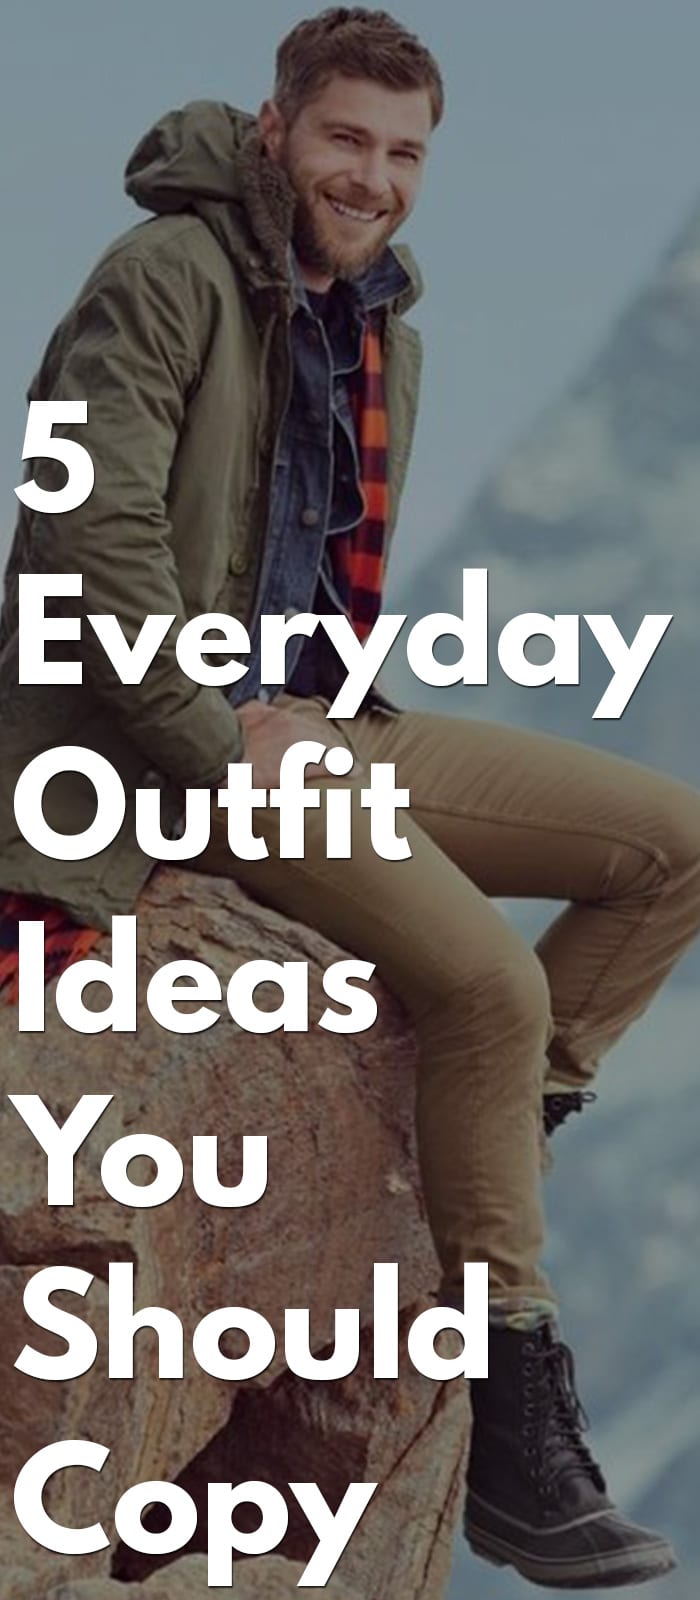 5 Everyday Outfit Ideas